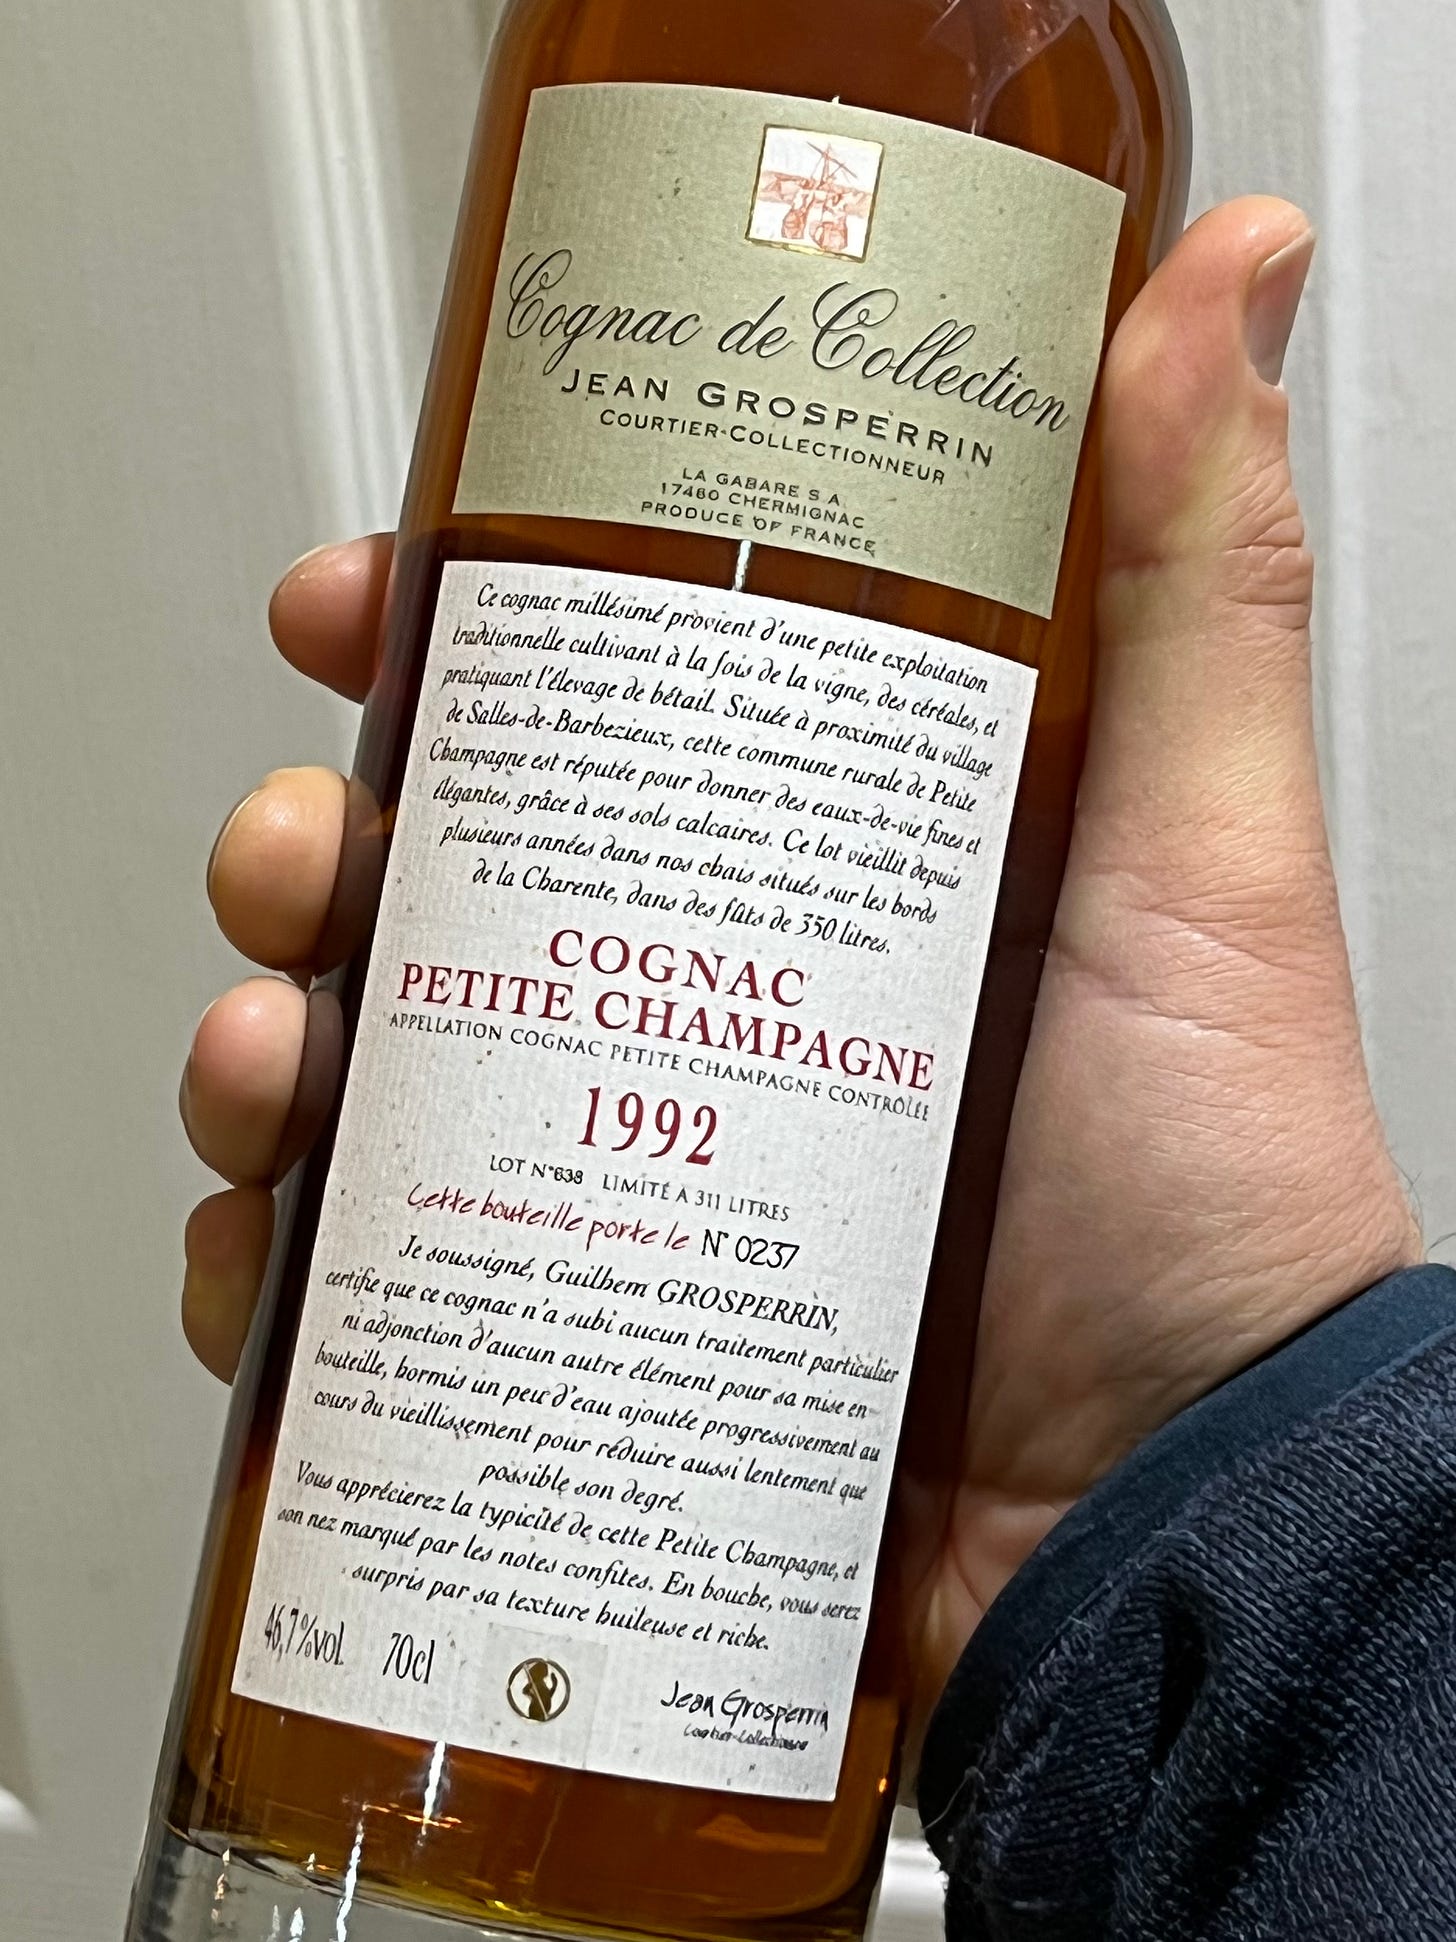 A bottle of 1992 Cognac is held up in a hand